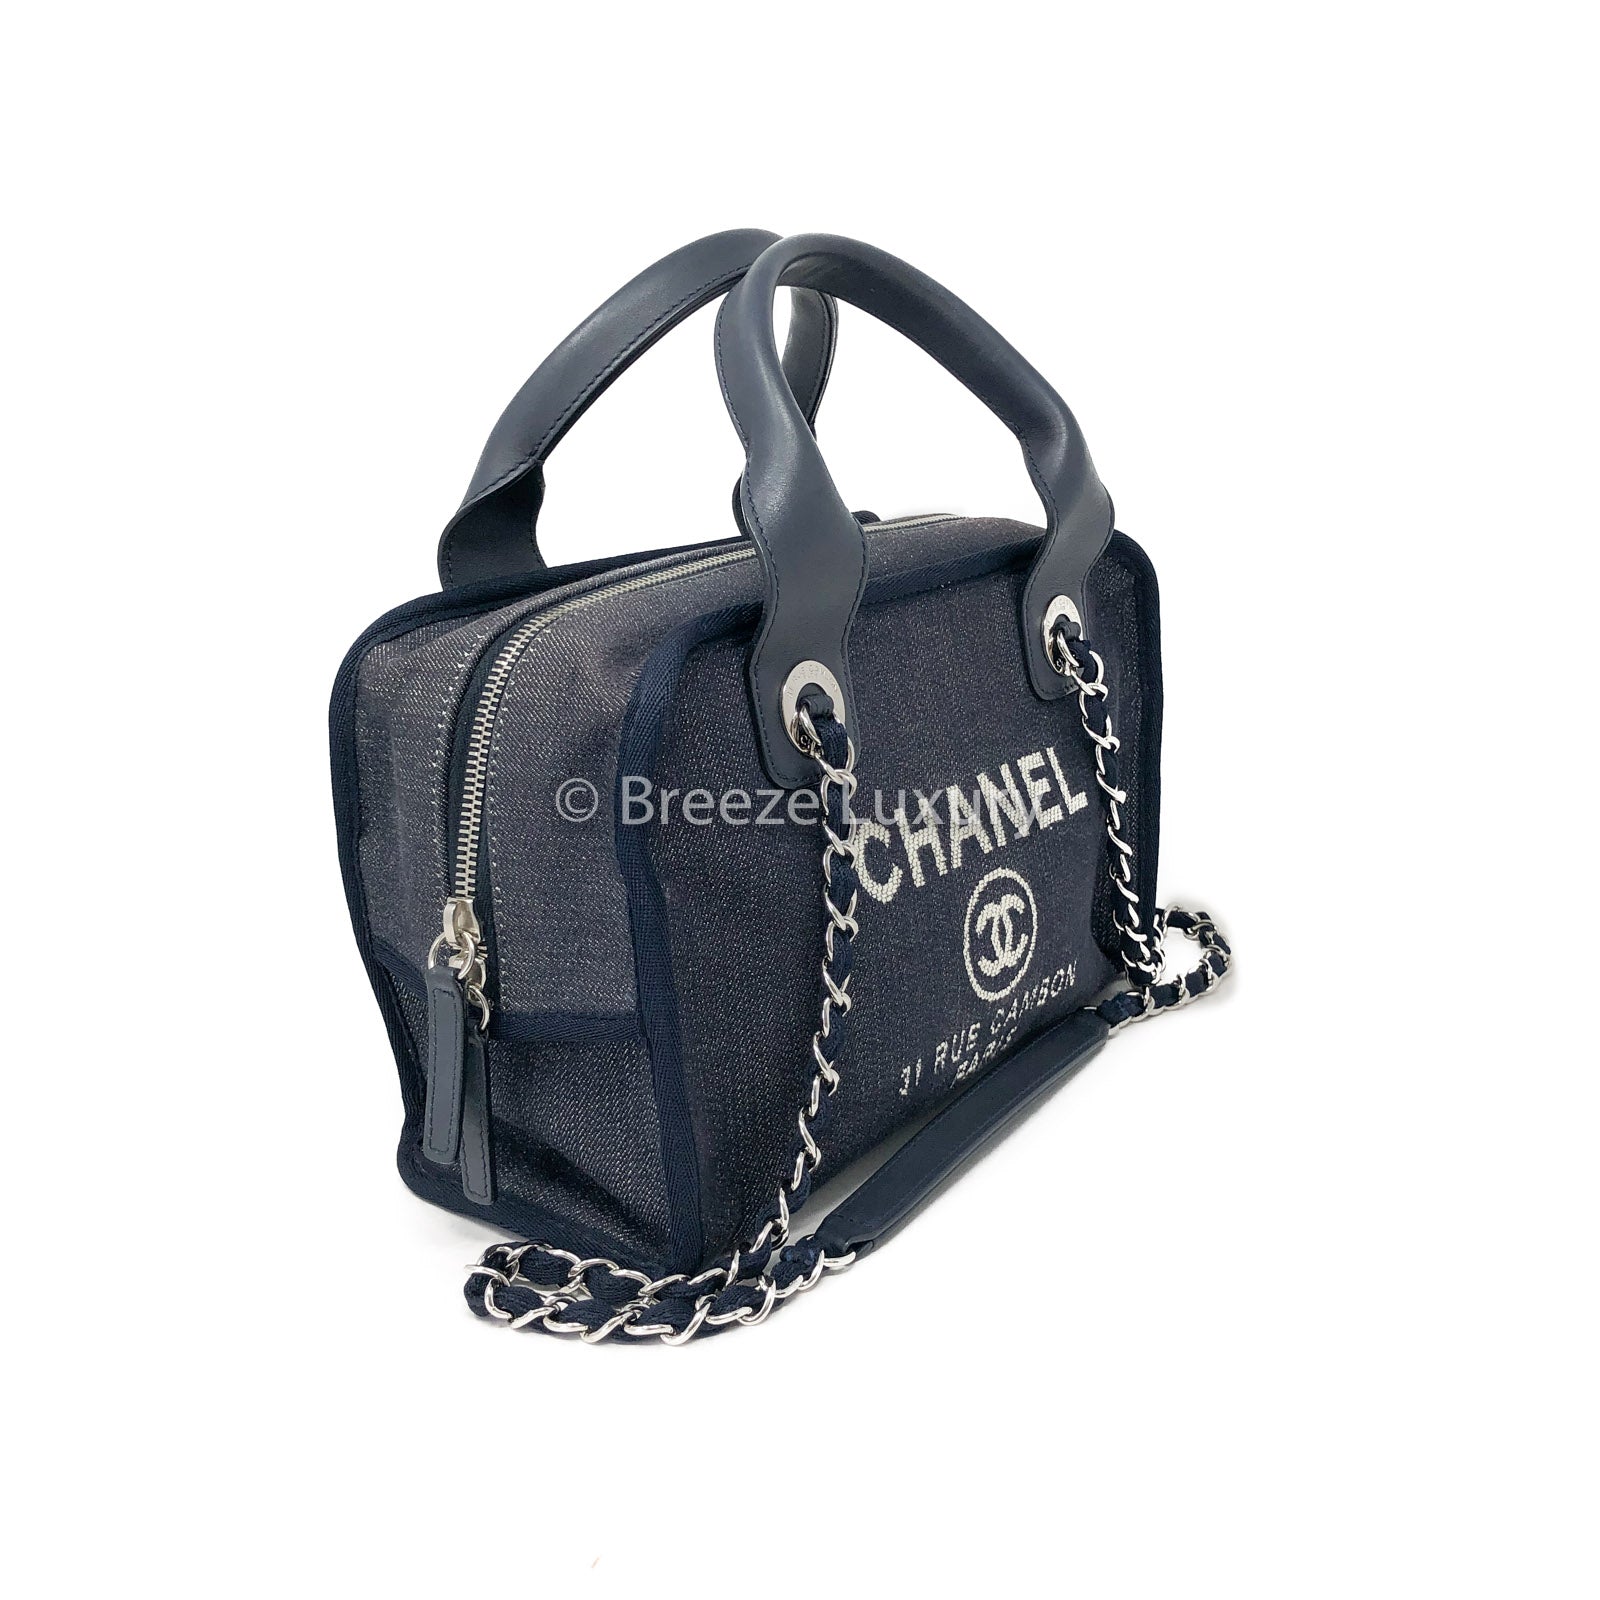 Chanel Deauville Bowling Bag in Midnight Blue Canvas & Black Calfskin - SOLD